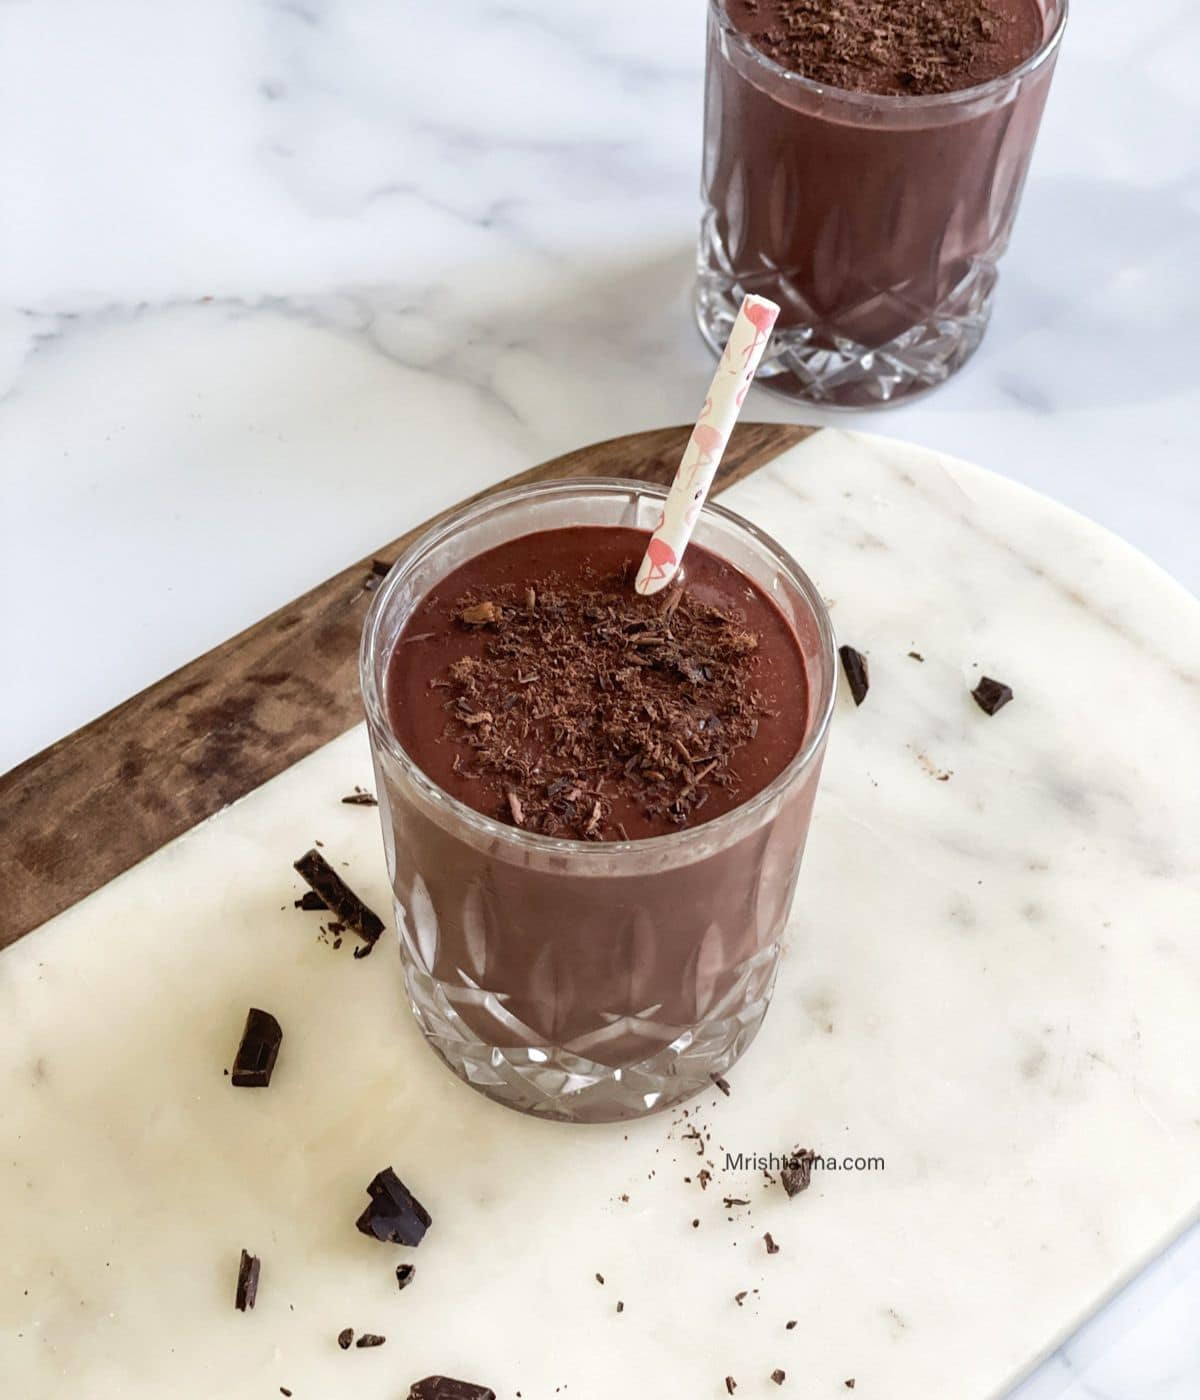 A glass of chocolate cherry smoothie is on the white tray with straw.